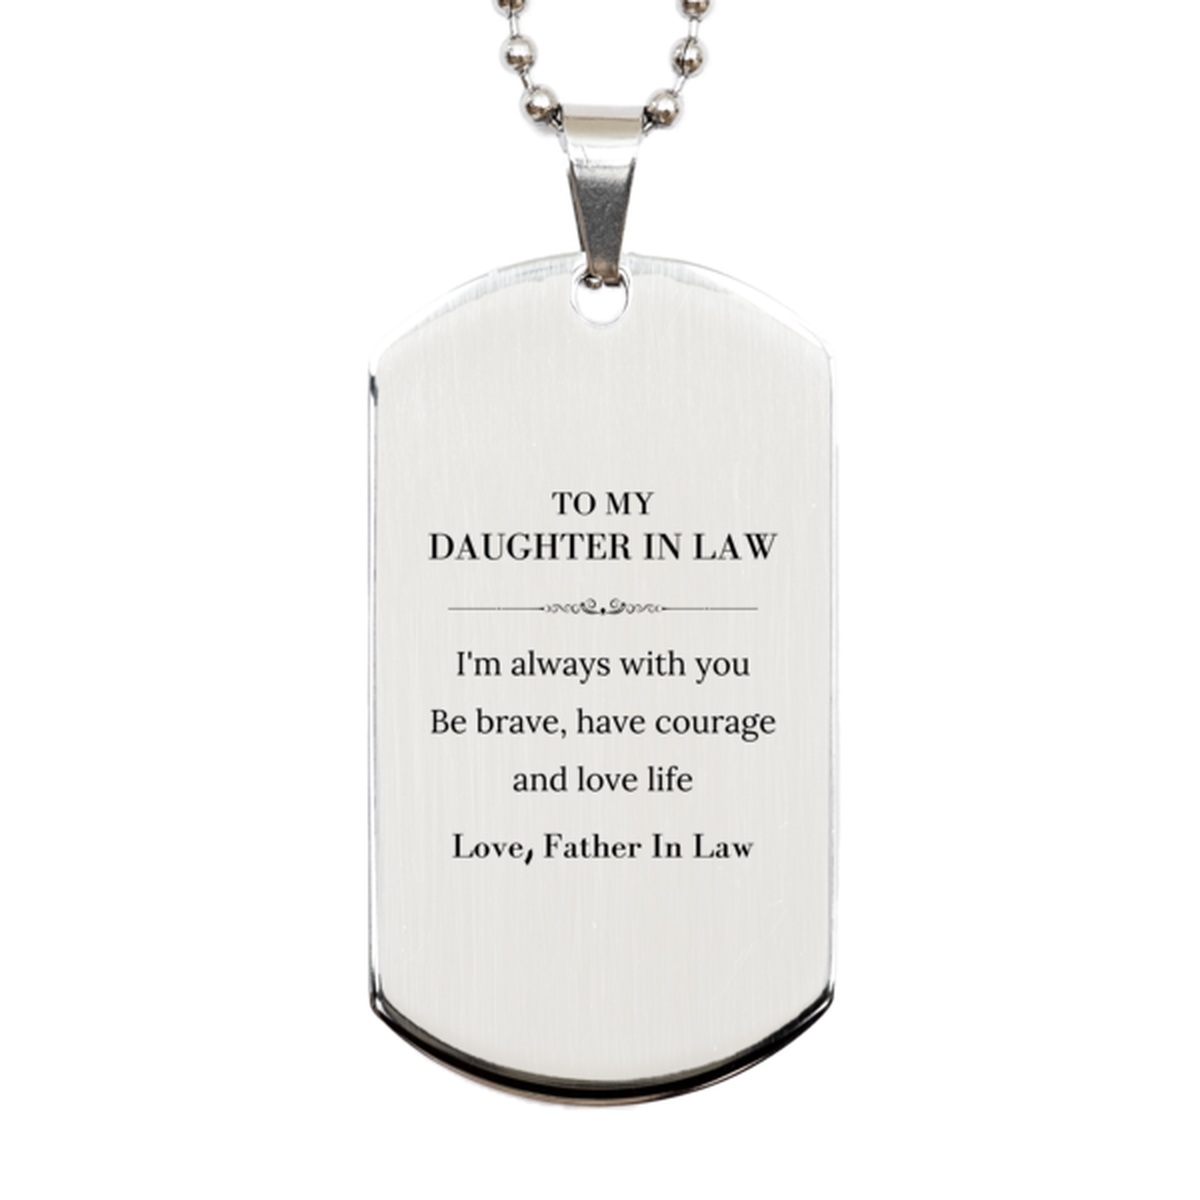 To My Daughter In Law Gifts from Father In Law, Unique Silver Dog Tag Inspirational Christmas Birthday Graduation Gifts for Daughter In Law I'm always with you. Be brave, have courage and love life. Love, Father In Law